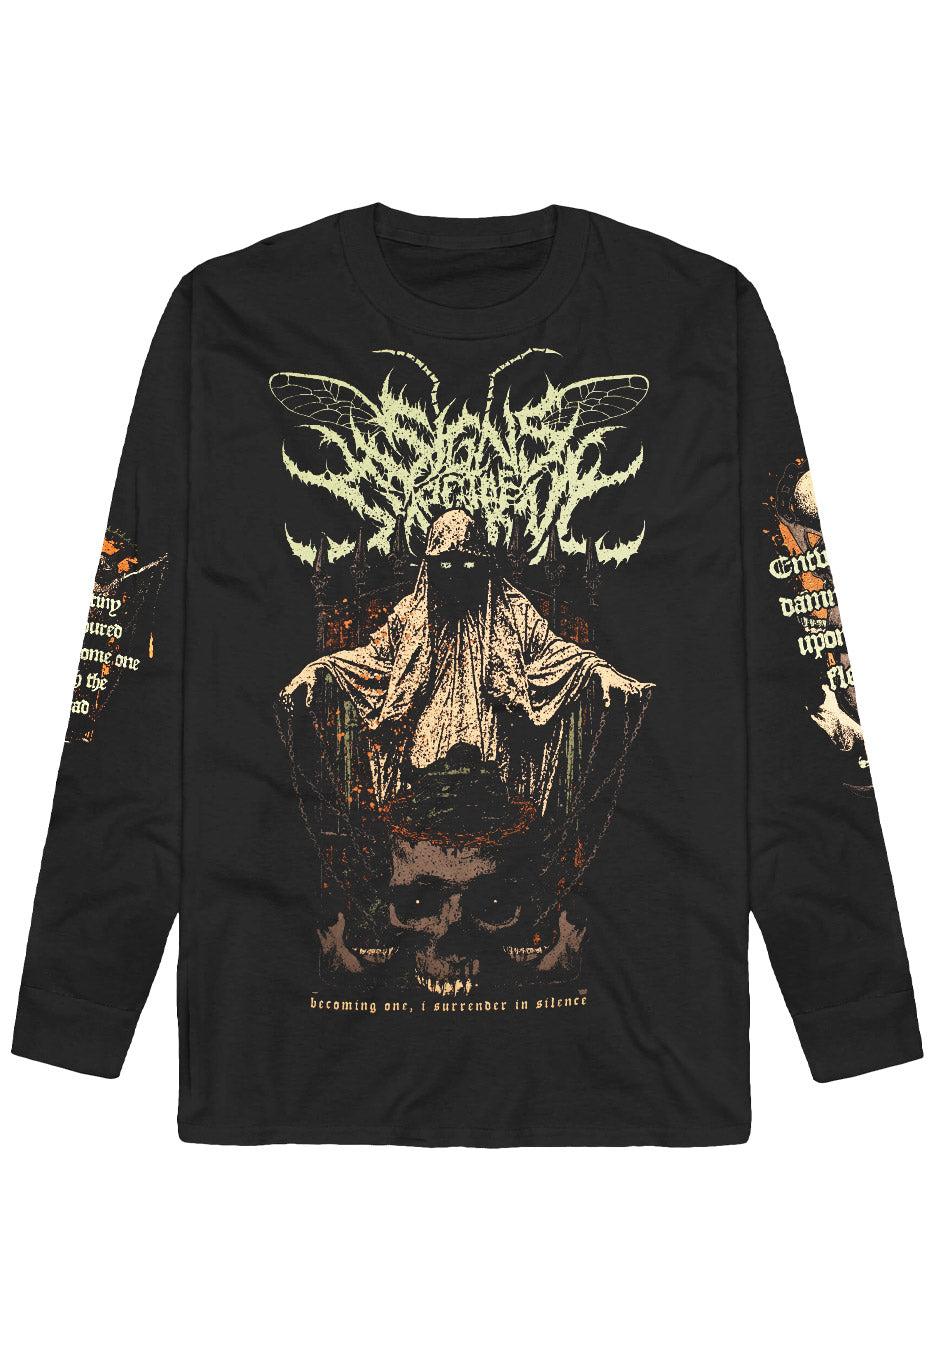 Signs Of The Swarm - Becoming One - Longsleeve